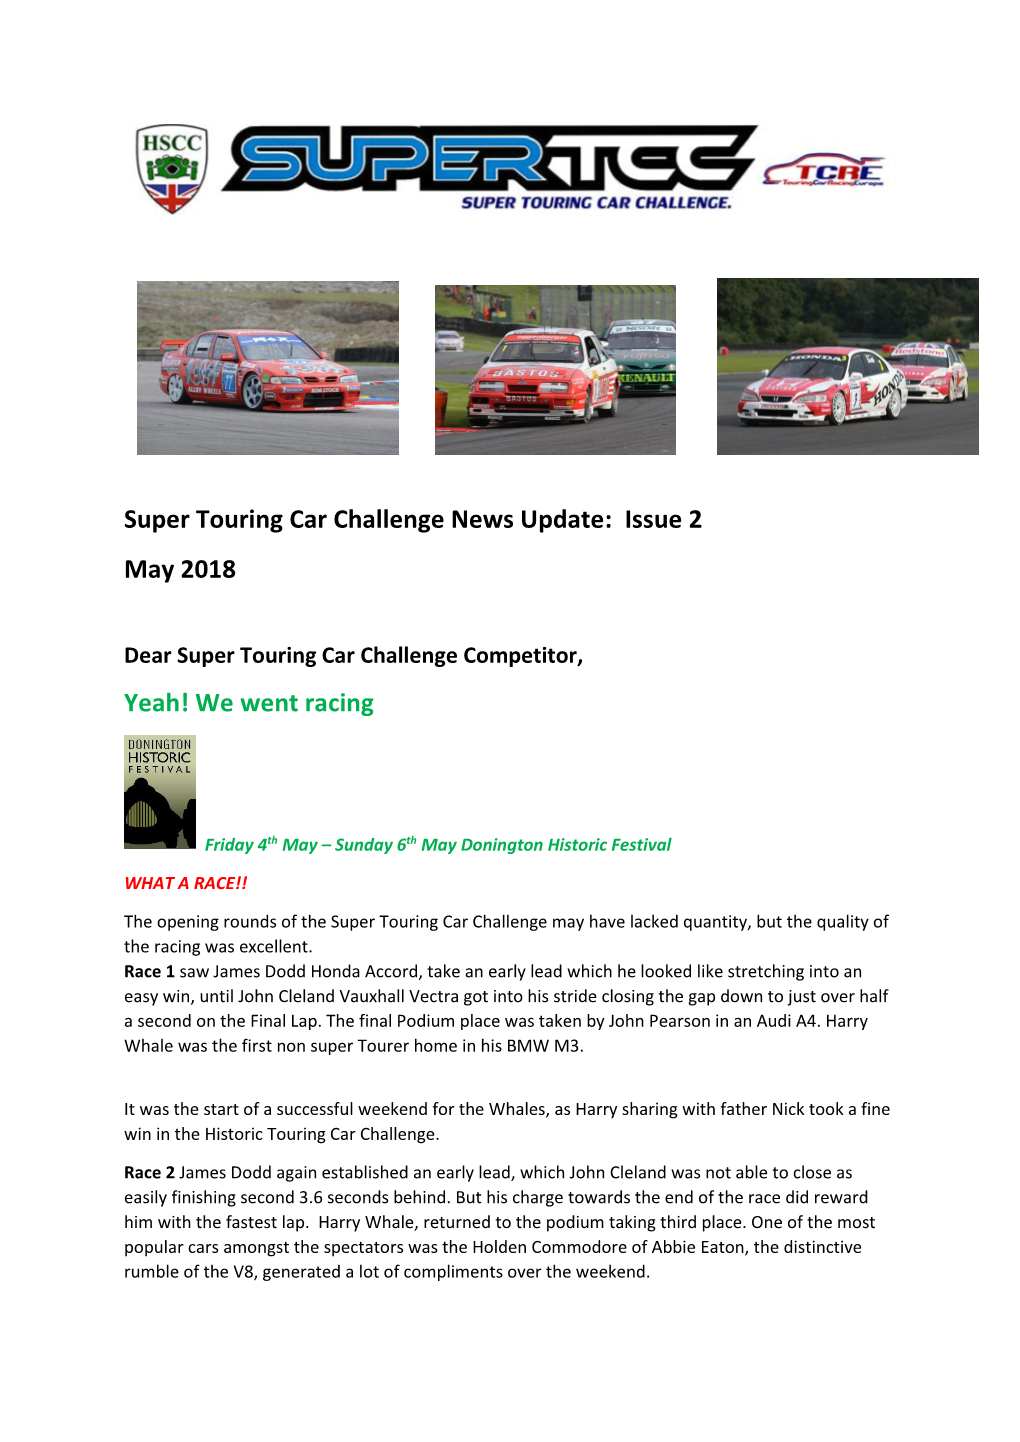 Super Touring Car Challenge News Update: Issue 2 May 2018 Yeah